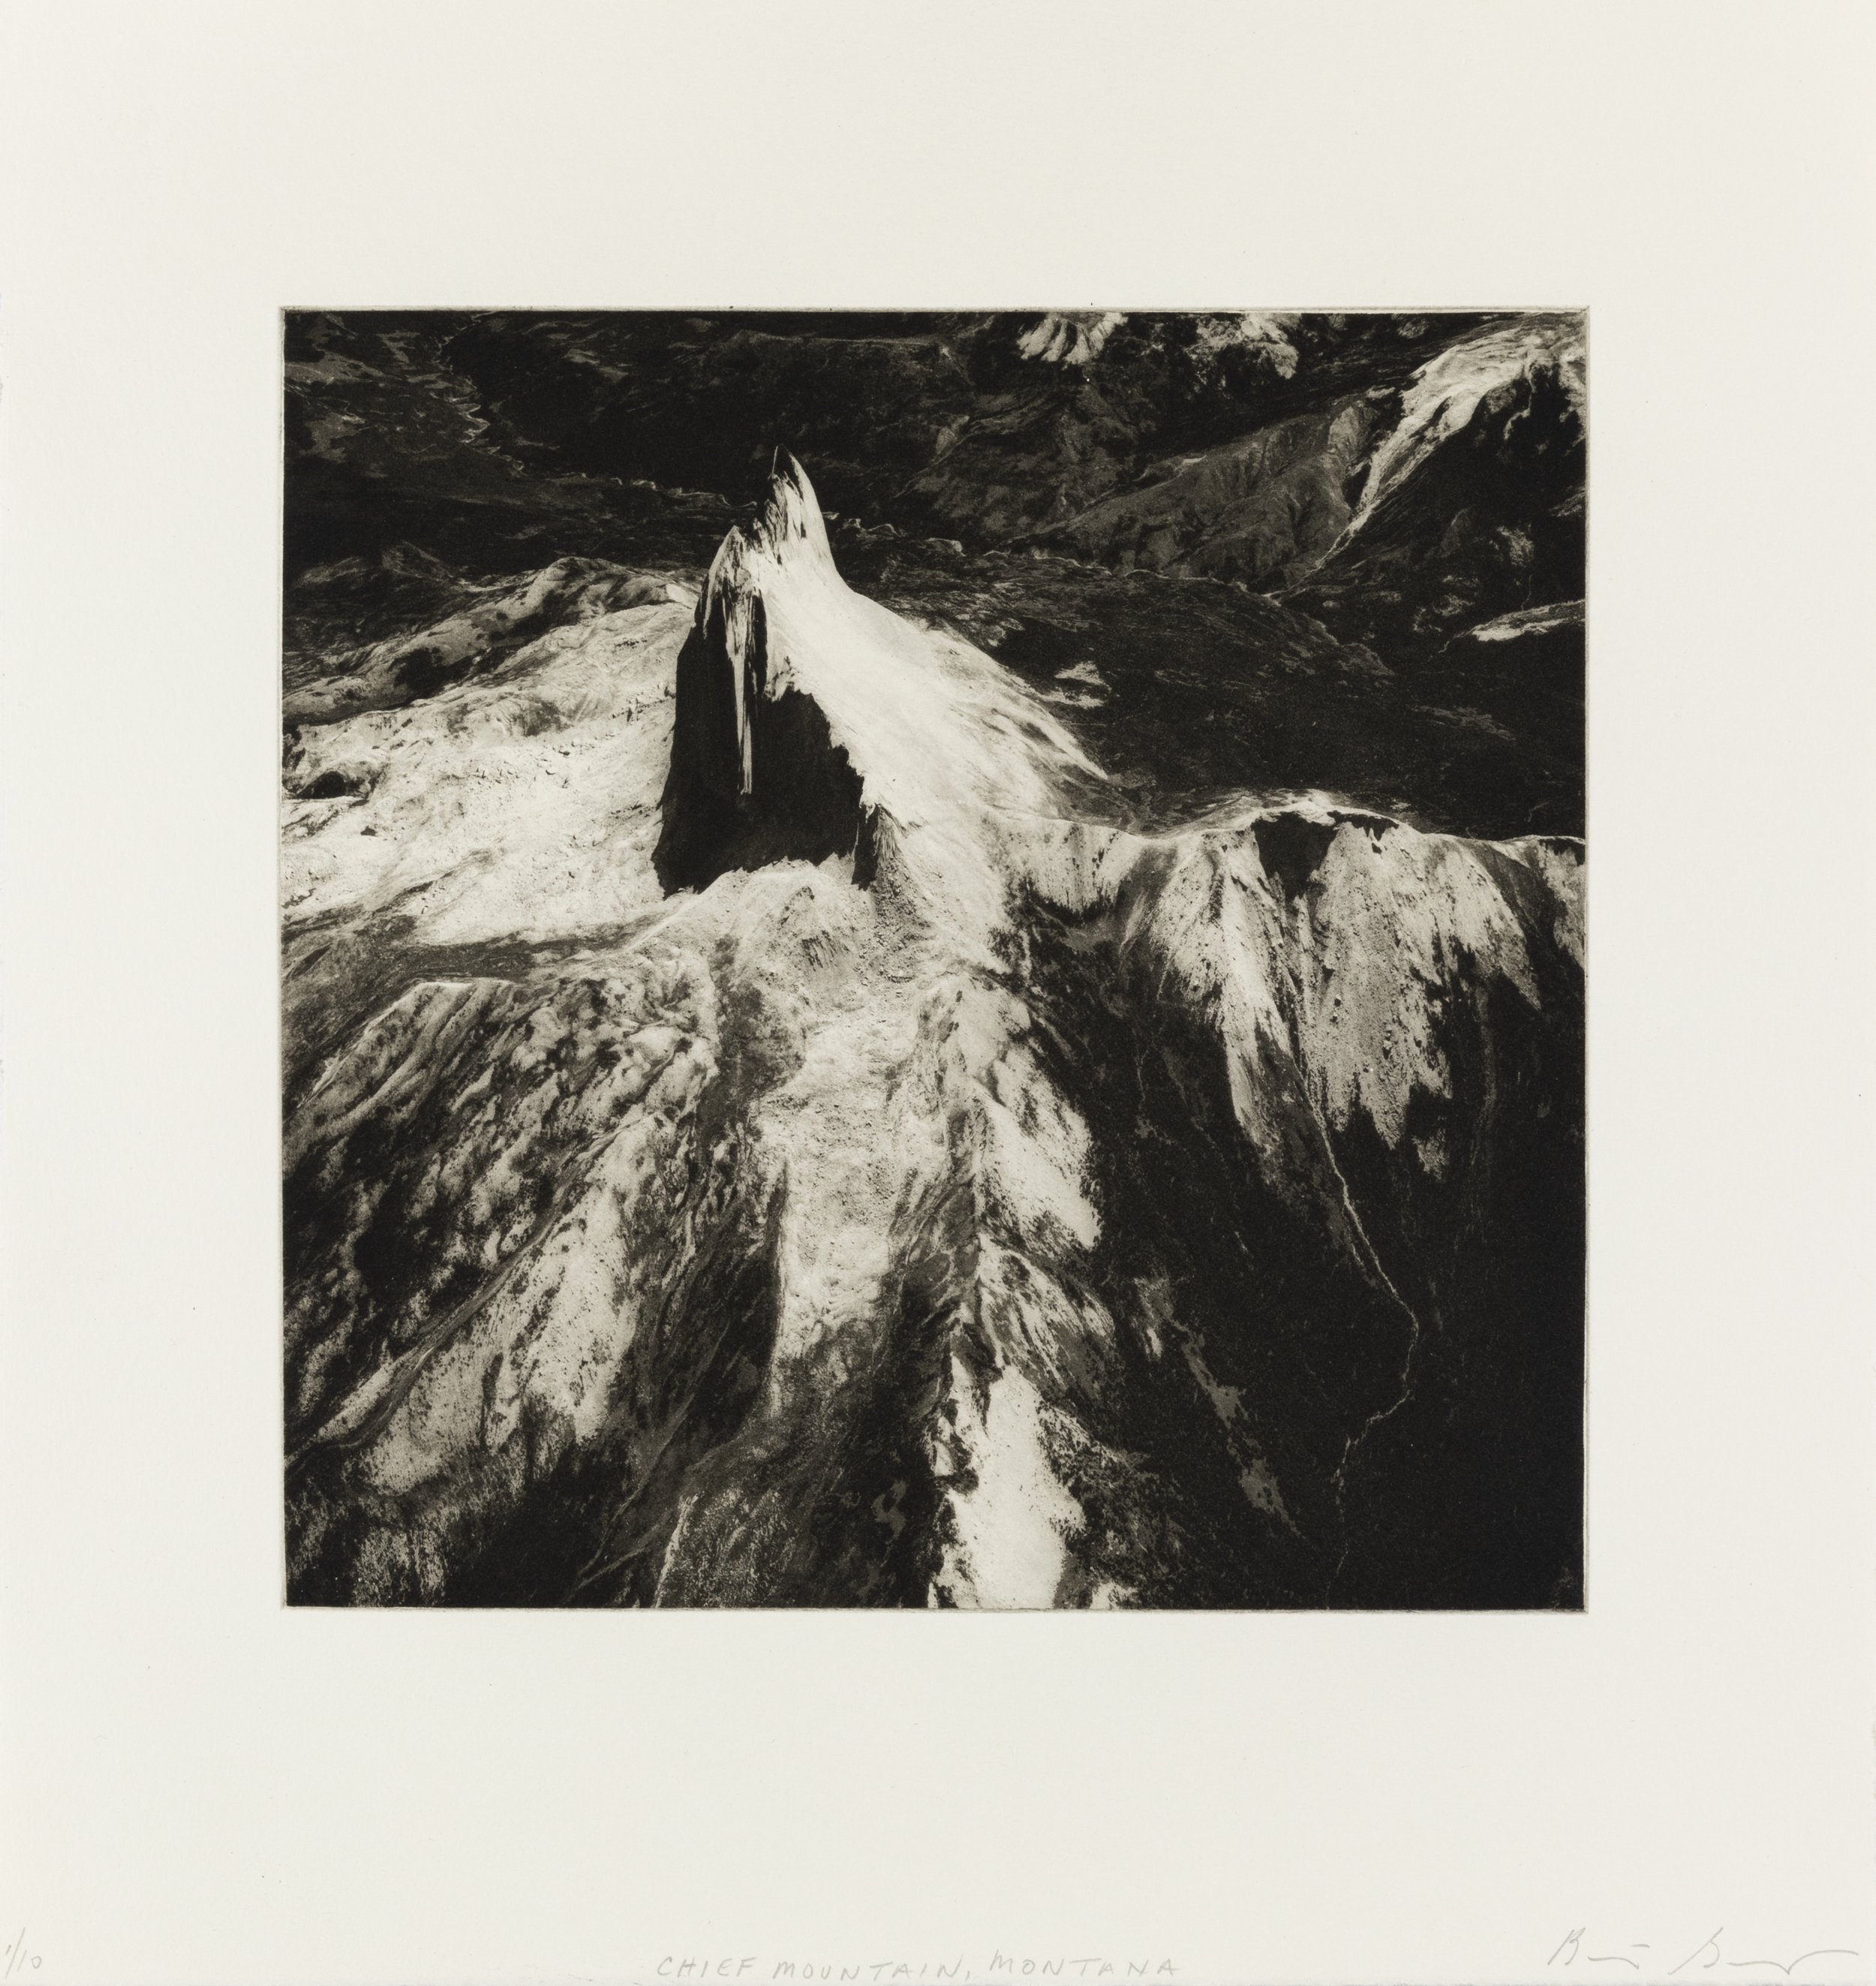    Chief Mountain, Montana, 2021   Copperplate photogravure etching on cotton rag paper, plate size; 10.6 x 10.6, paper size; 16 x 15.5, edition 10        